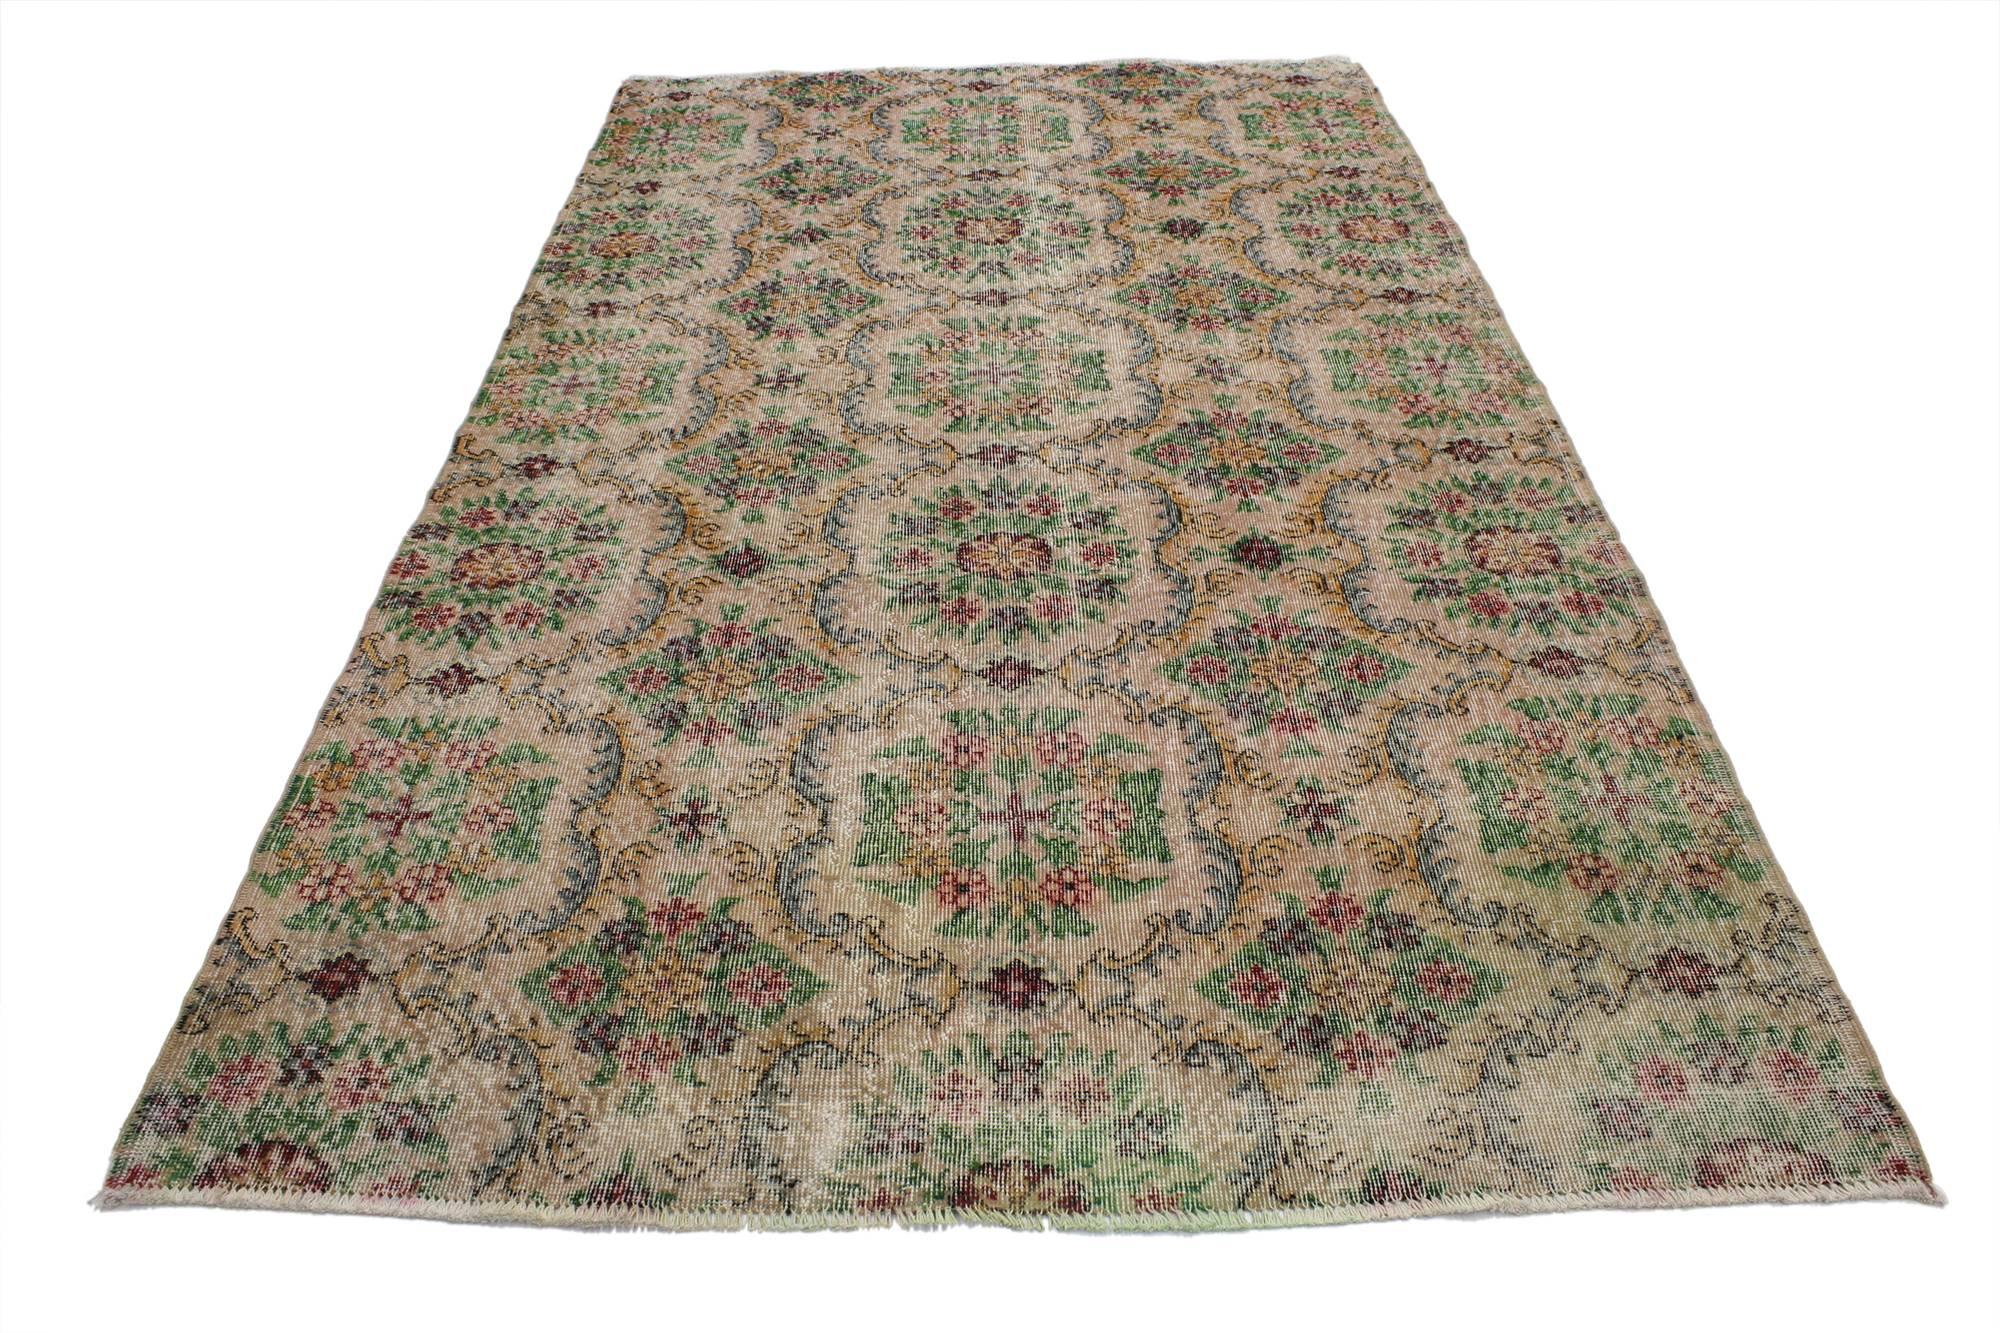 51992 Distressed Vintage Turkish Sivas Rug with Swedish Country Farmhouse Style. Lovingly timeworn with Gustavian grace, this hand knotted wool distressed Turkish Sivas rug beautifully embodies a Swedish Country Farmhouse style. This distressed